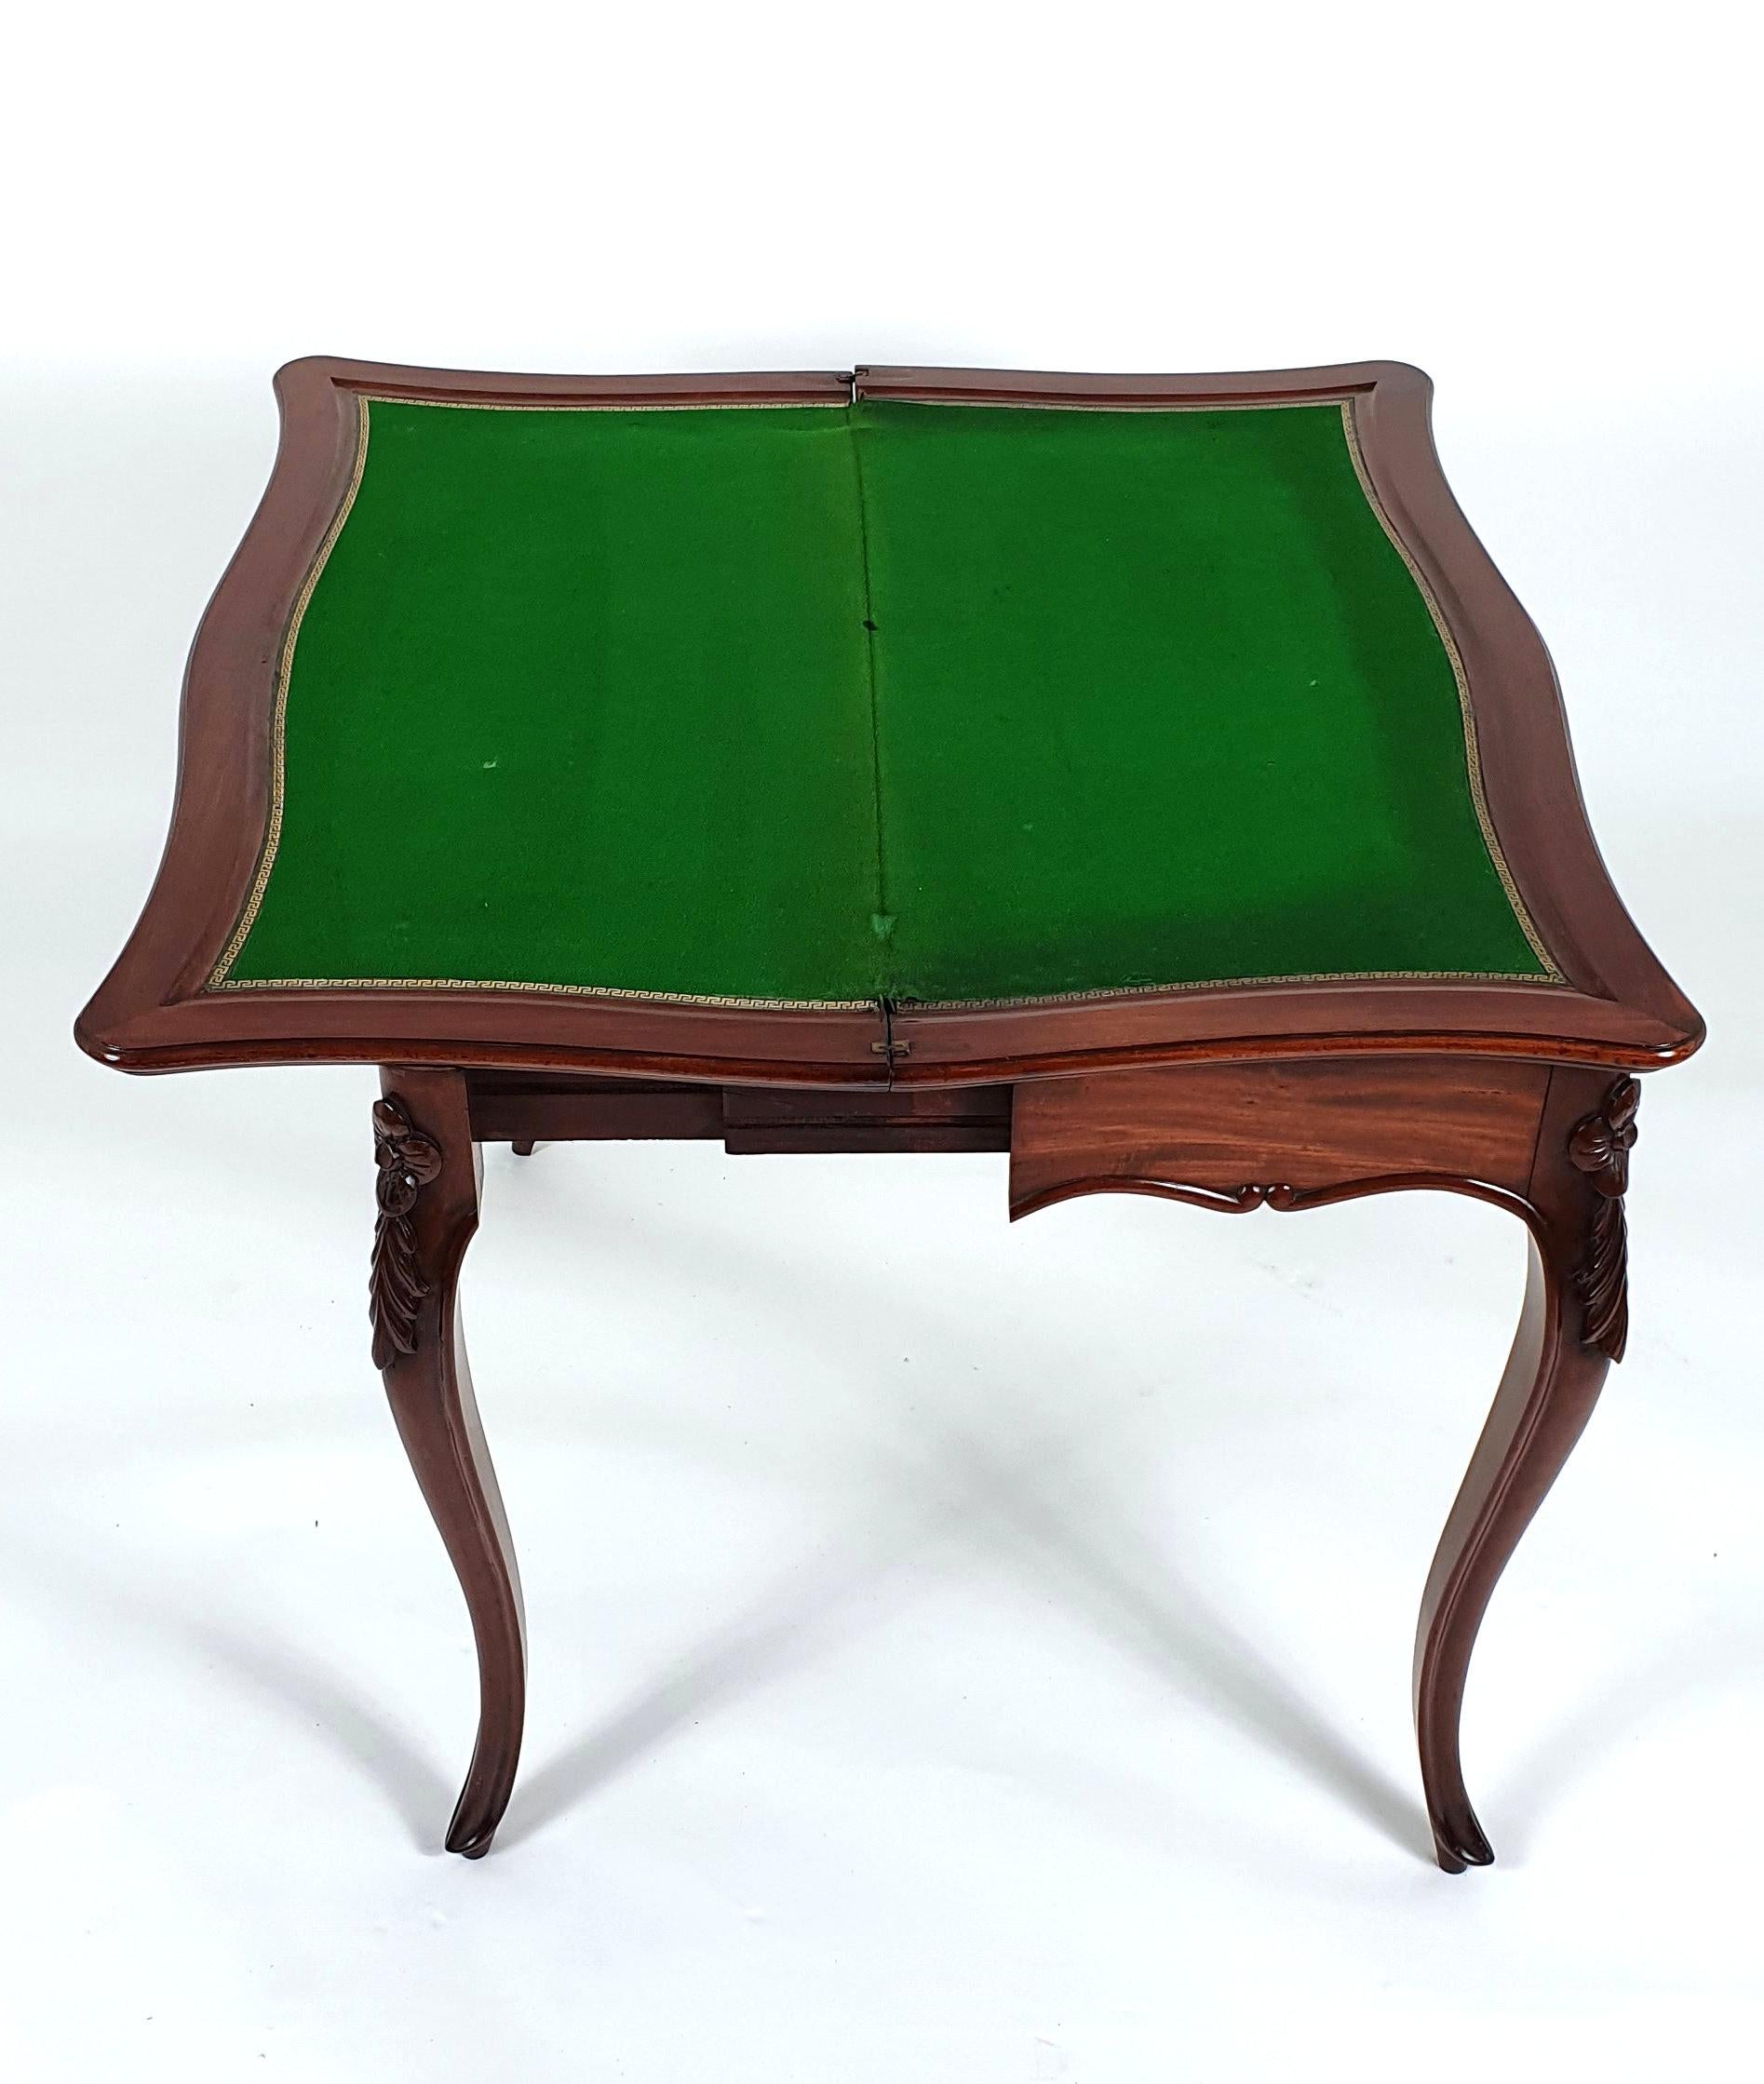 19th Century French Figured Mahogany Fold-Over Card Table For Sale 8